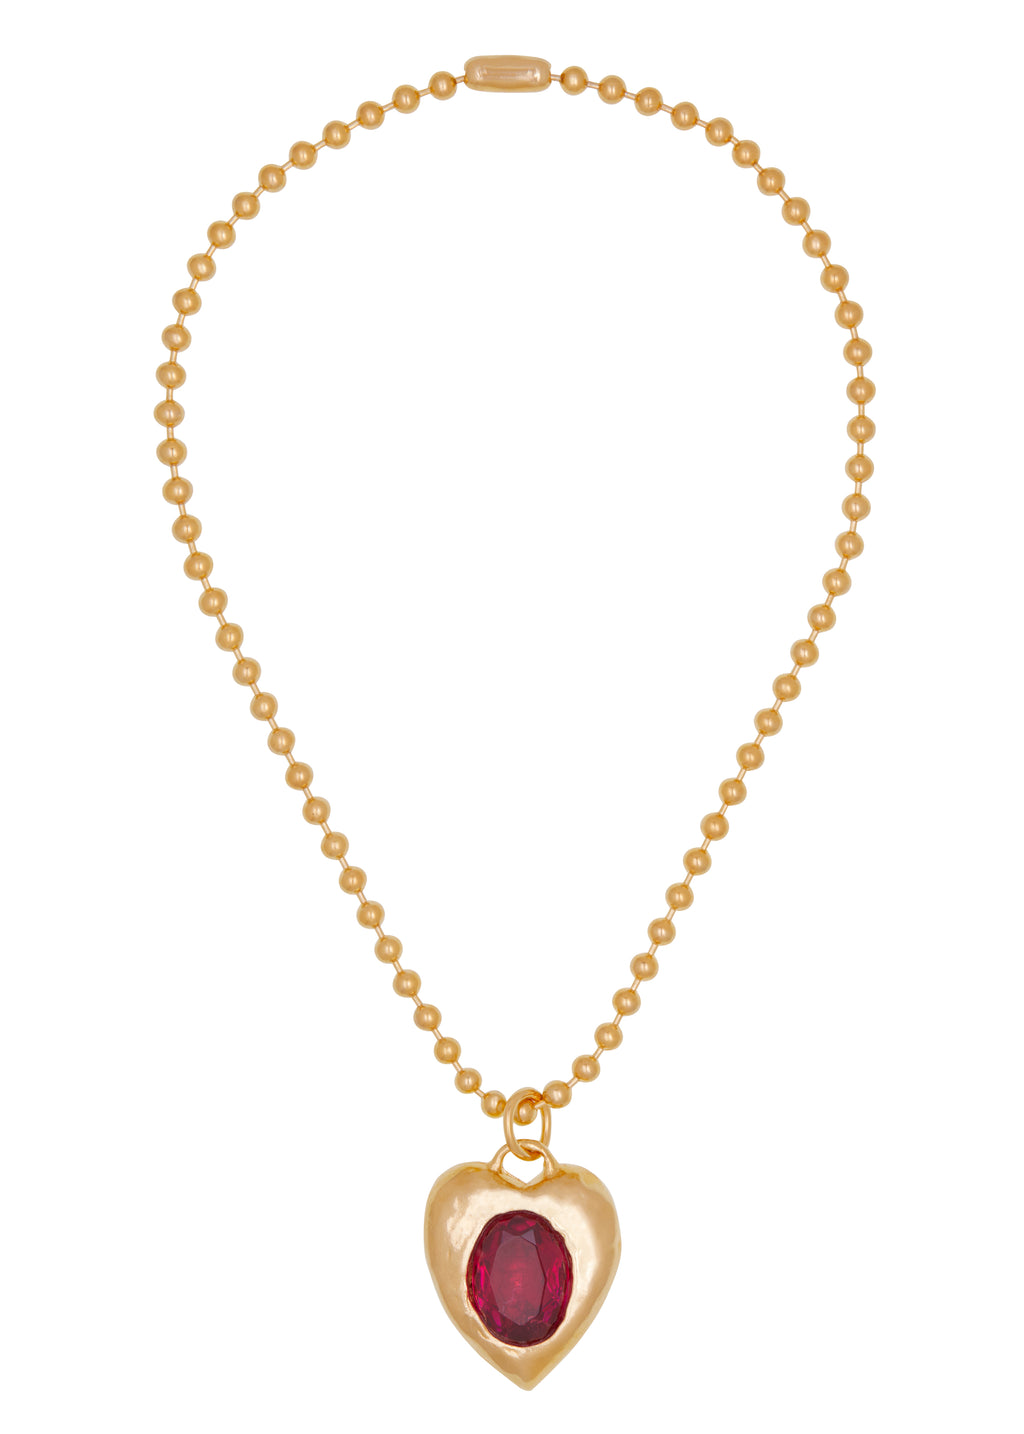 Pacha Necklace in Gold - Fuchsia